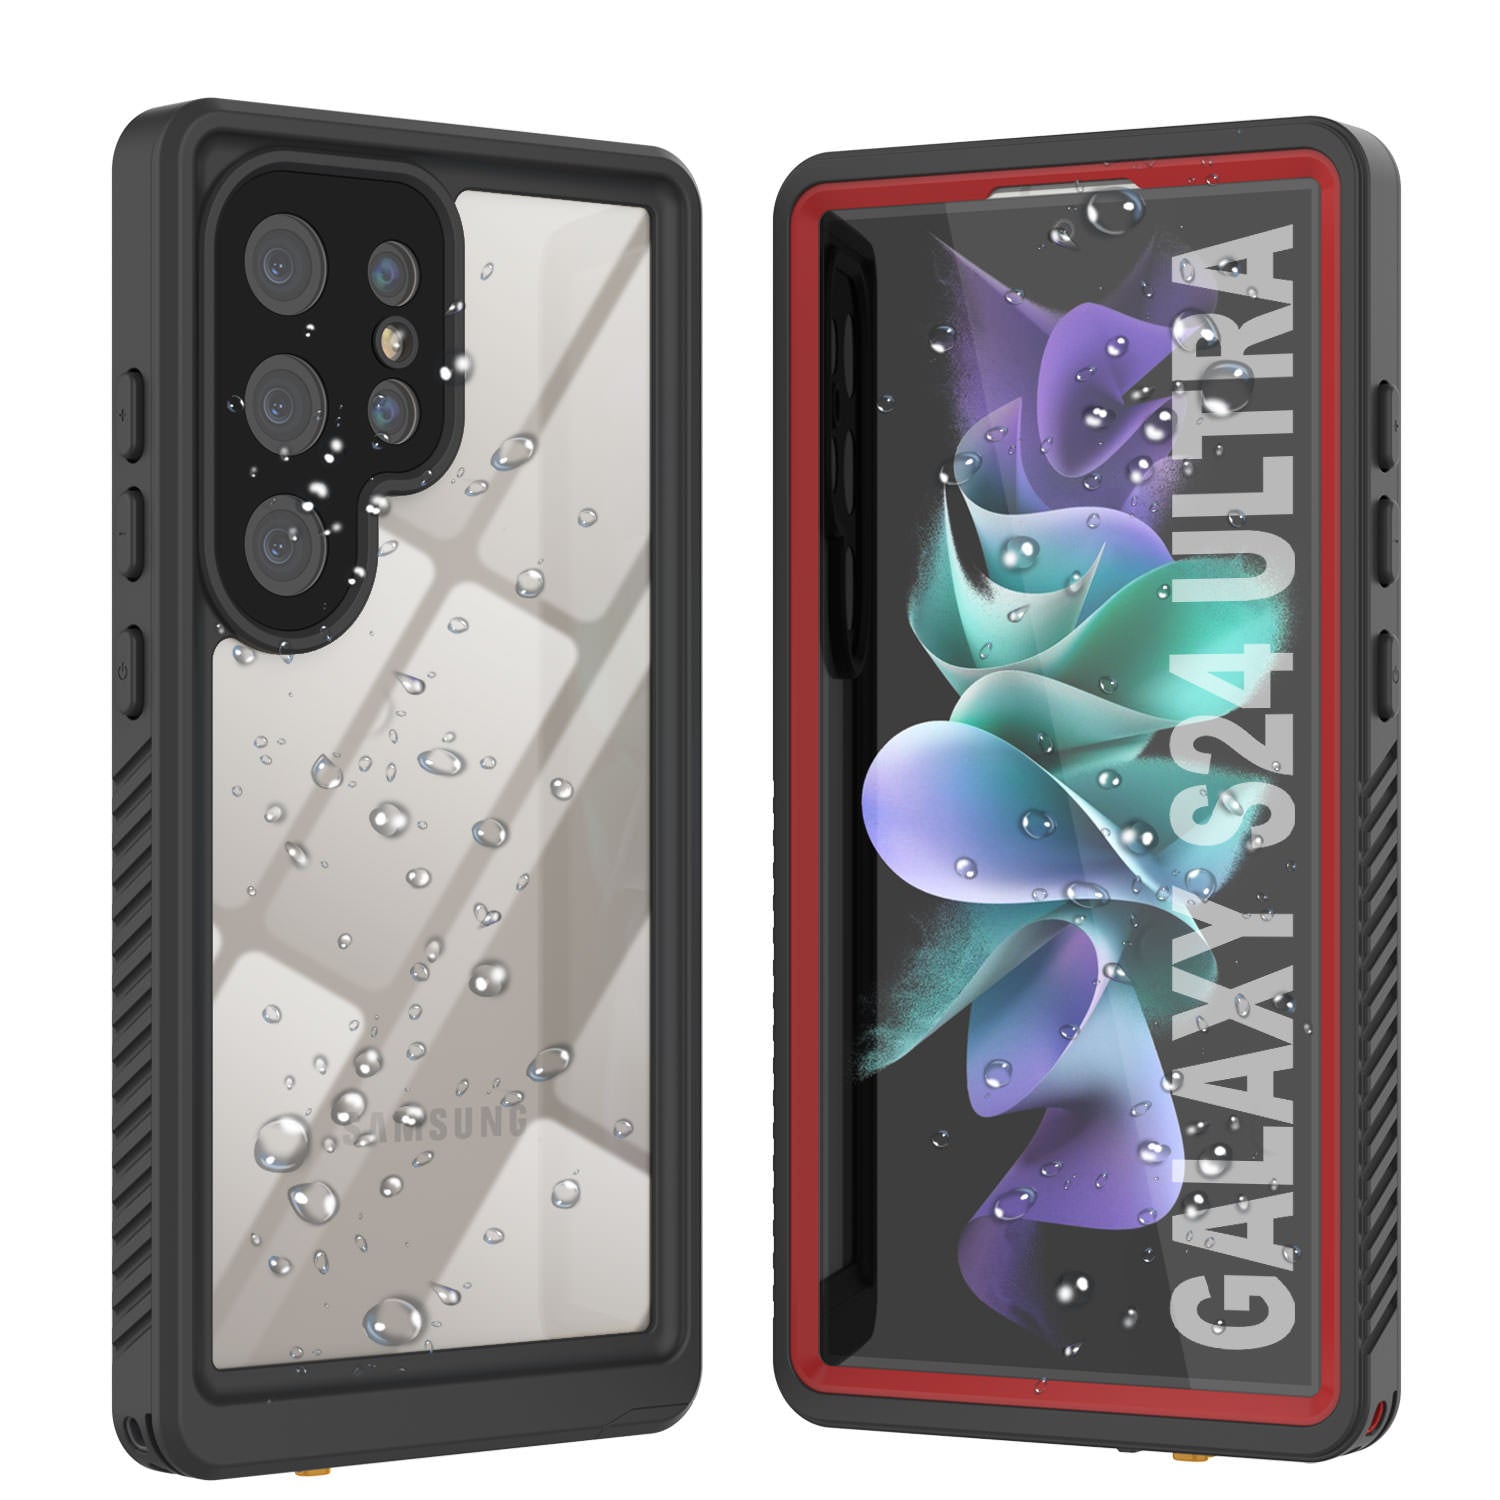 https://www.punkcase.com/cdn/shop/files/galaxy-S24-ultra-waterproof-case-extreme-series-ultra-slim-fit-innovative-design-ip68-certified-advanced-sealing-scratch-resistant-shockproof-dirtproof-snowproof-armor-cover-for-galax_0b1ca59b-63a2-440a-8677-cee67dd34433.jpg?v=1704836524